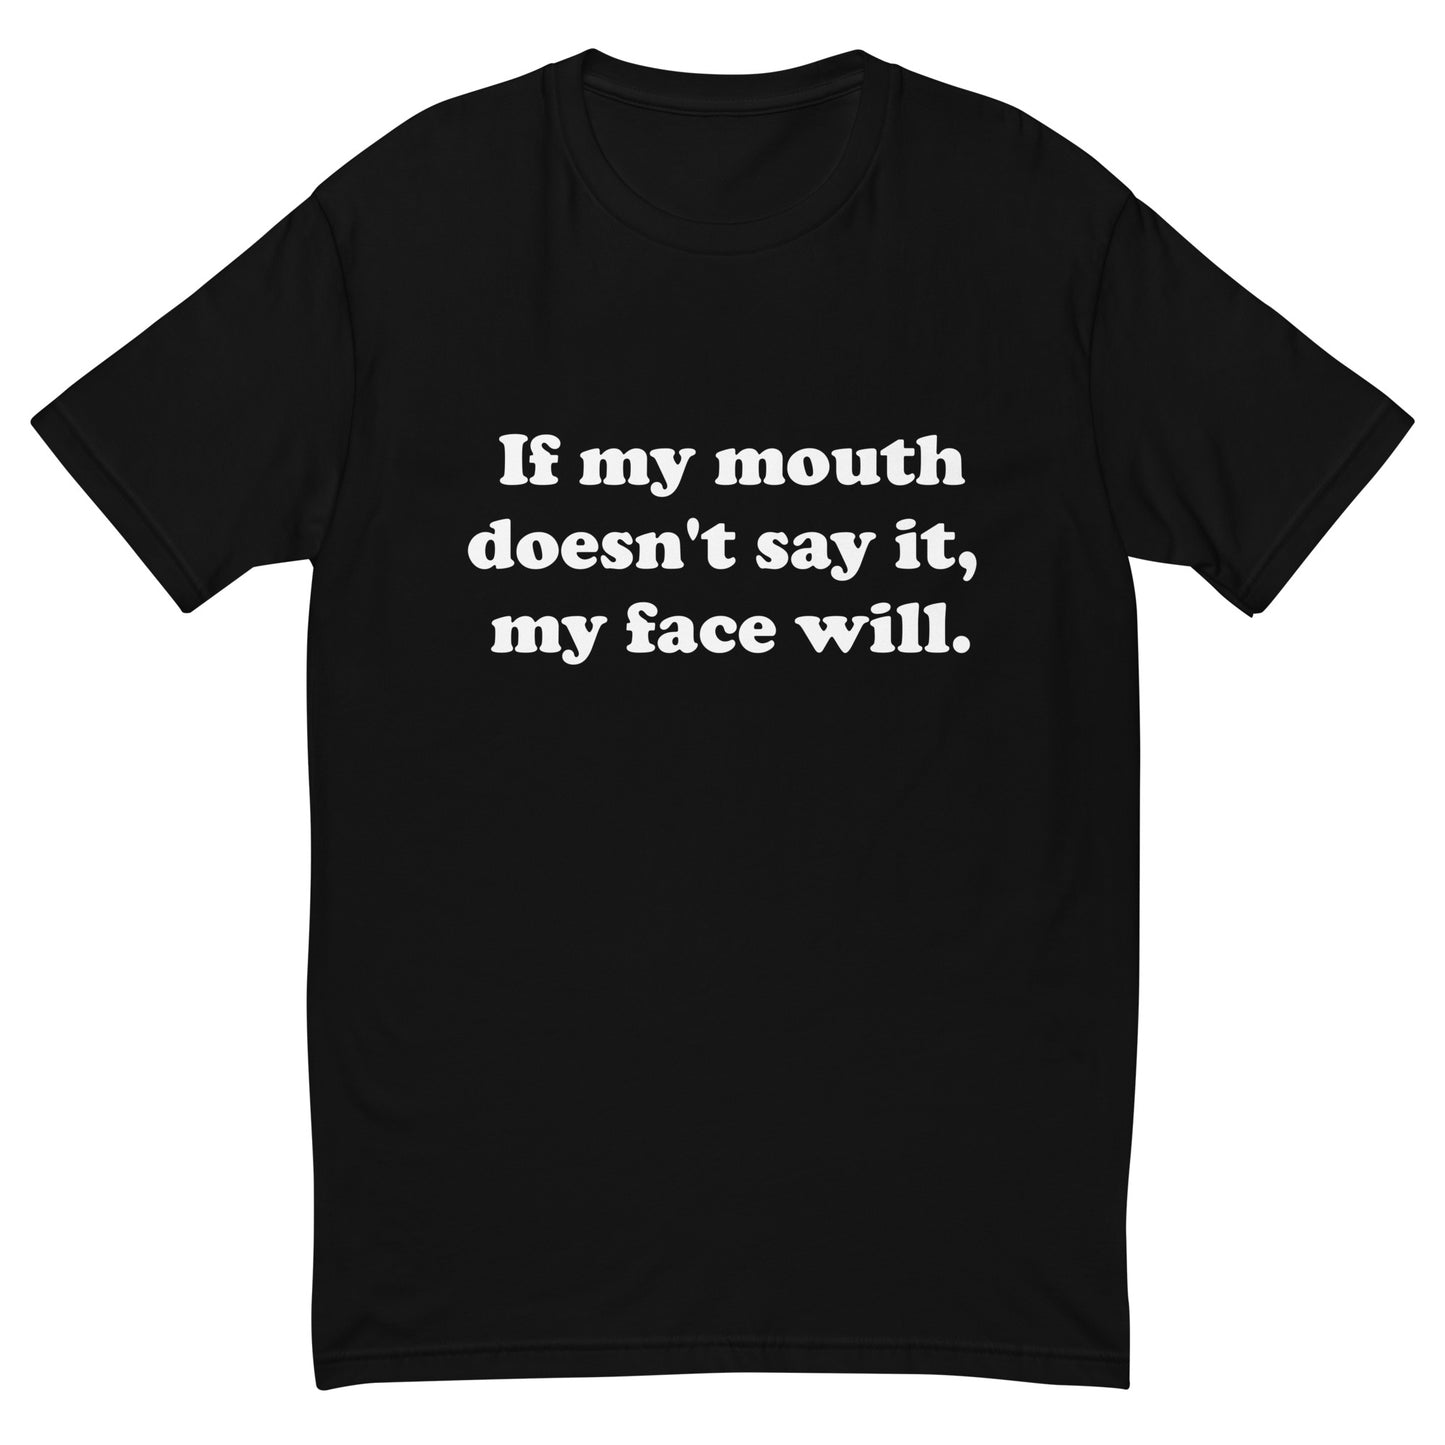 If my mouth doesn't say it, my face will men's T-shirt